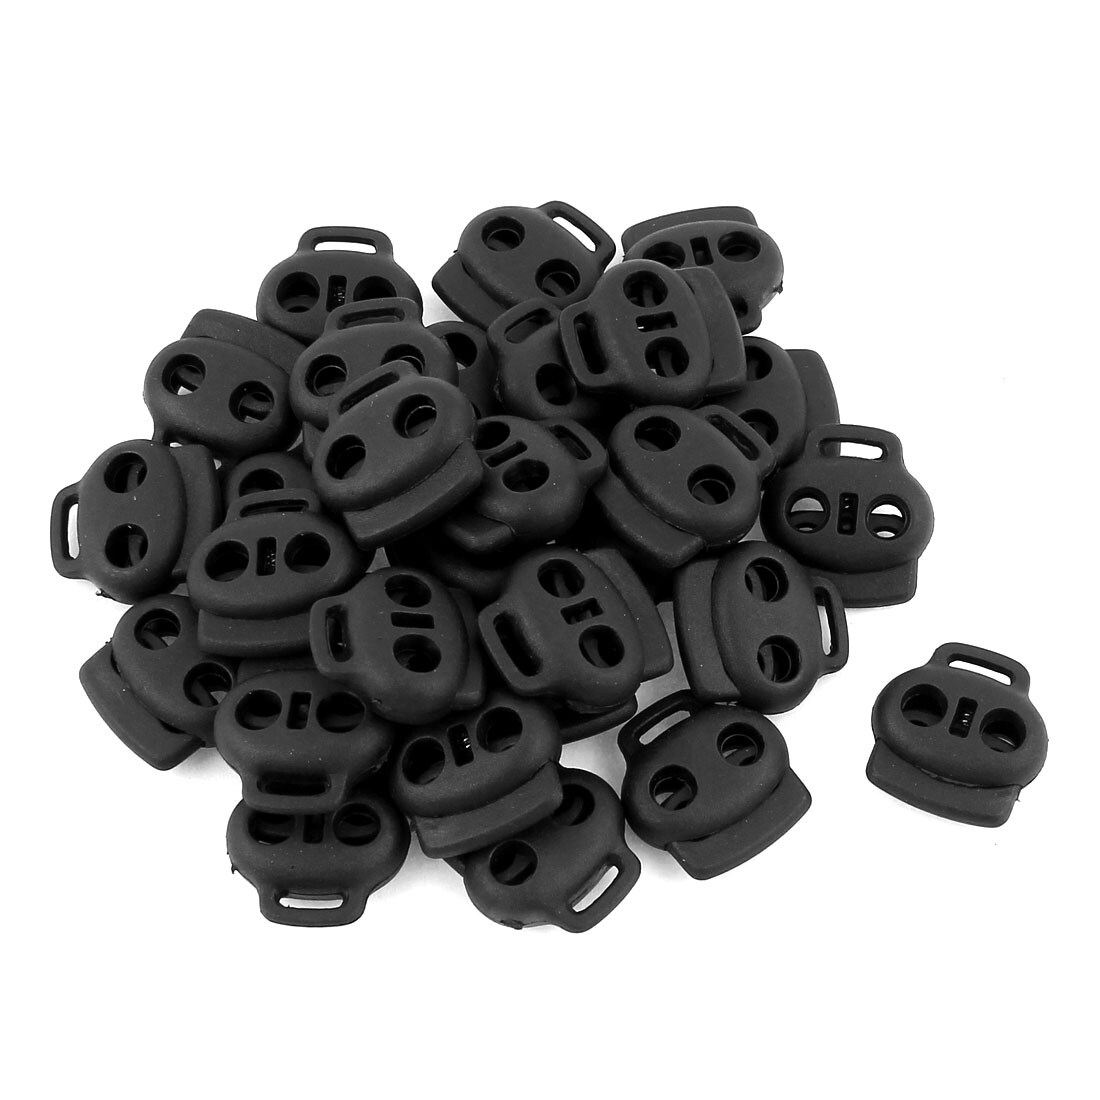 100 Pcs Gray Spring Loaded 5mm Dia Dual Holes Cord Locks Stoppers Toggles